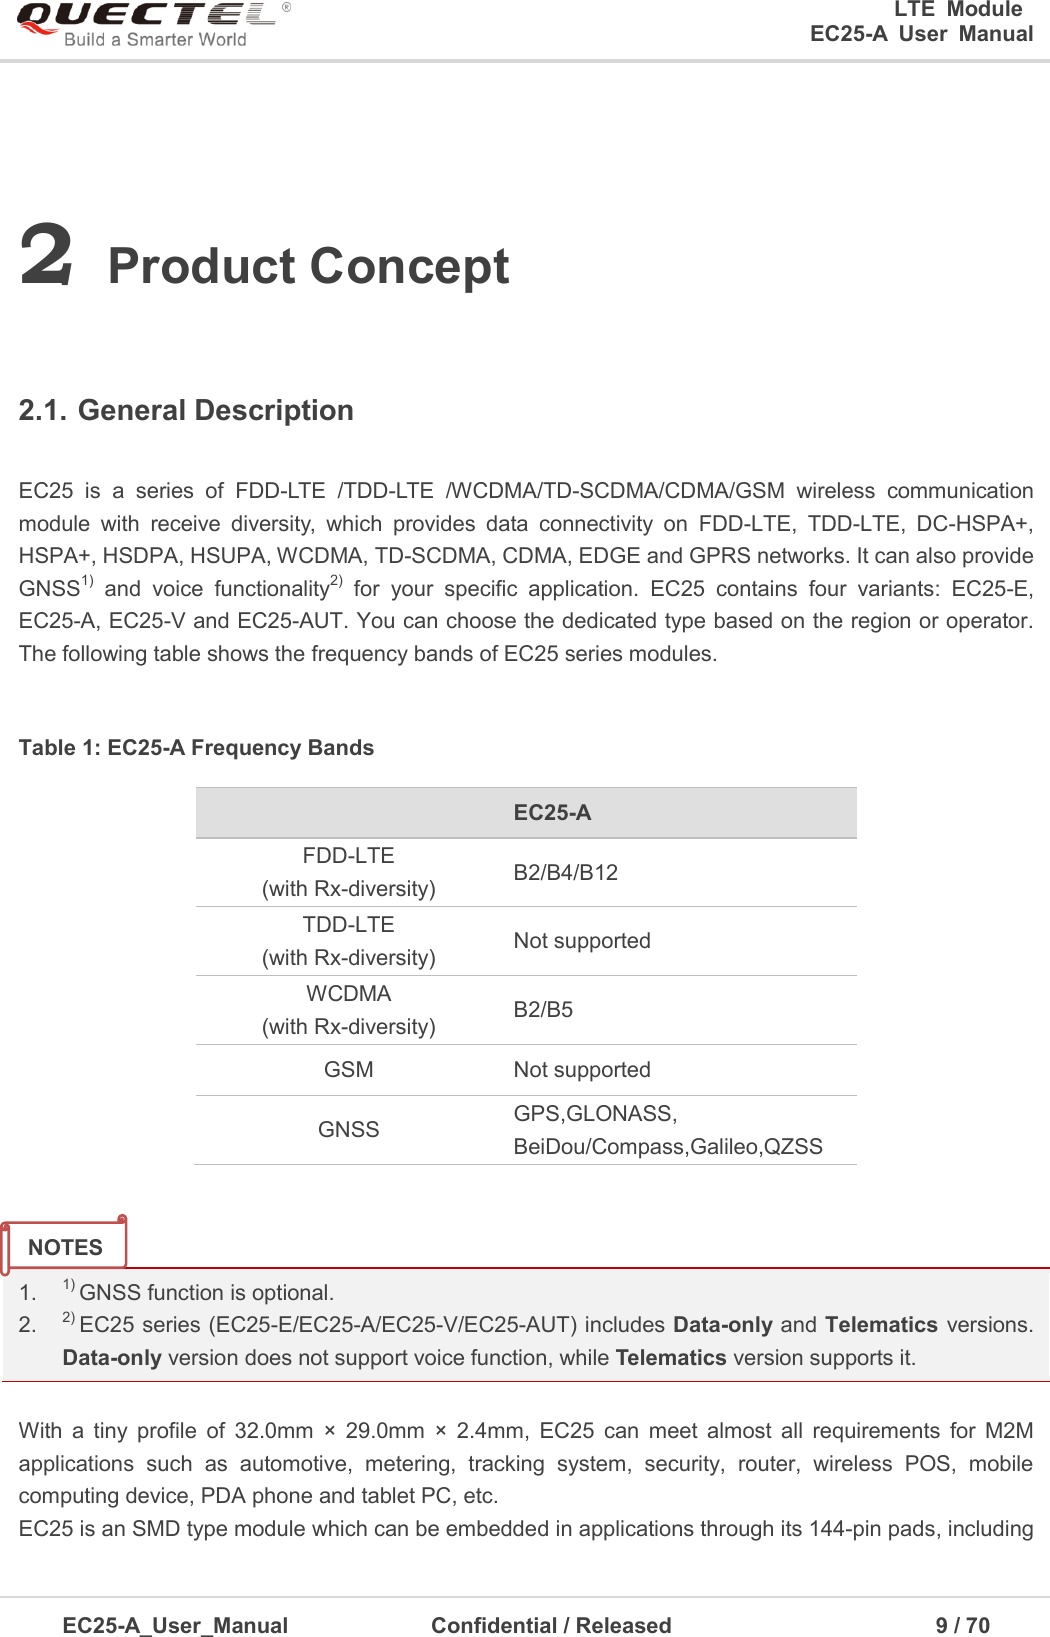 0                                                                       LTE  Module                                                    EC25-A  User  Manual  EC25-A_User_Manual               Confidential / Released                                            9 / 7      2 Product Concept  2.1. General Description  EC25  is a  series  of  FDD-LTE  /TDD-LTE  /WCDMA/TD-SCDMA/CDMA/GSM  wireless  communication module  with  receive  diversity,  which  provides  data  connectivity  on  FDD-LTE,  TDD-LTE,  DC-HSPA+, HSPA+, HSDPA, HSUPA, WCDMA, TD-SCDMA, CDMA, EDGE and GPRS networks. It can also provide GNSS1)  and  voice  functionality2)  for  your  specific  application.  EC25  contains  four  variants:  EC25-E, EC25-A, EC25-V and EC25-AUT. You can choose the dedicated type based on the region or operator. The following table shows the frequency bands of EC25 series modules.  Table 1: EC25-A Frequency Bands               1. 1) GNSS function is optional. 2. 2) EC25 series (EC25-E/EC25-A/EC25-V/EC25-AUT) includes Data-only and Telematics versions. Data-only version does not support voice function, while Telematics version supports it.  With  a  tiny  profile  of  32.0mm  ×  29.0mm  ×  2.4mm,  EC25  can  meet  almost  all  requirements  for  M2M applications  such  as  automotive,  metering,  tracking  system,  security,  router,  wireless  POS,  mobile computing device, PDA phone and tablet PC, etc. EC25 is an SMD type module which can be embedded in applications through its 144-pin pads, including  EC25-A FDD-LTE (with Rx-diversity)  B2/B4/B12 TDD-LTE (with Rx-diversity)  Not supported WCDMA (with Rx-diversity)  B2/B5 GSM  Not supported GNSS  GPS,GLONASS, BeiDou/Compass,Galileo,QZSS NOTES 